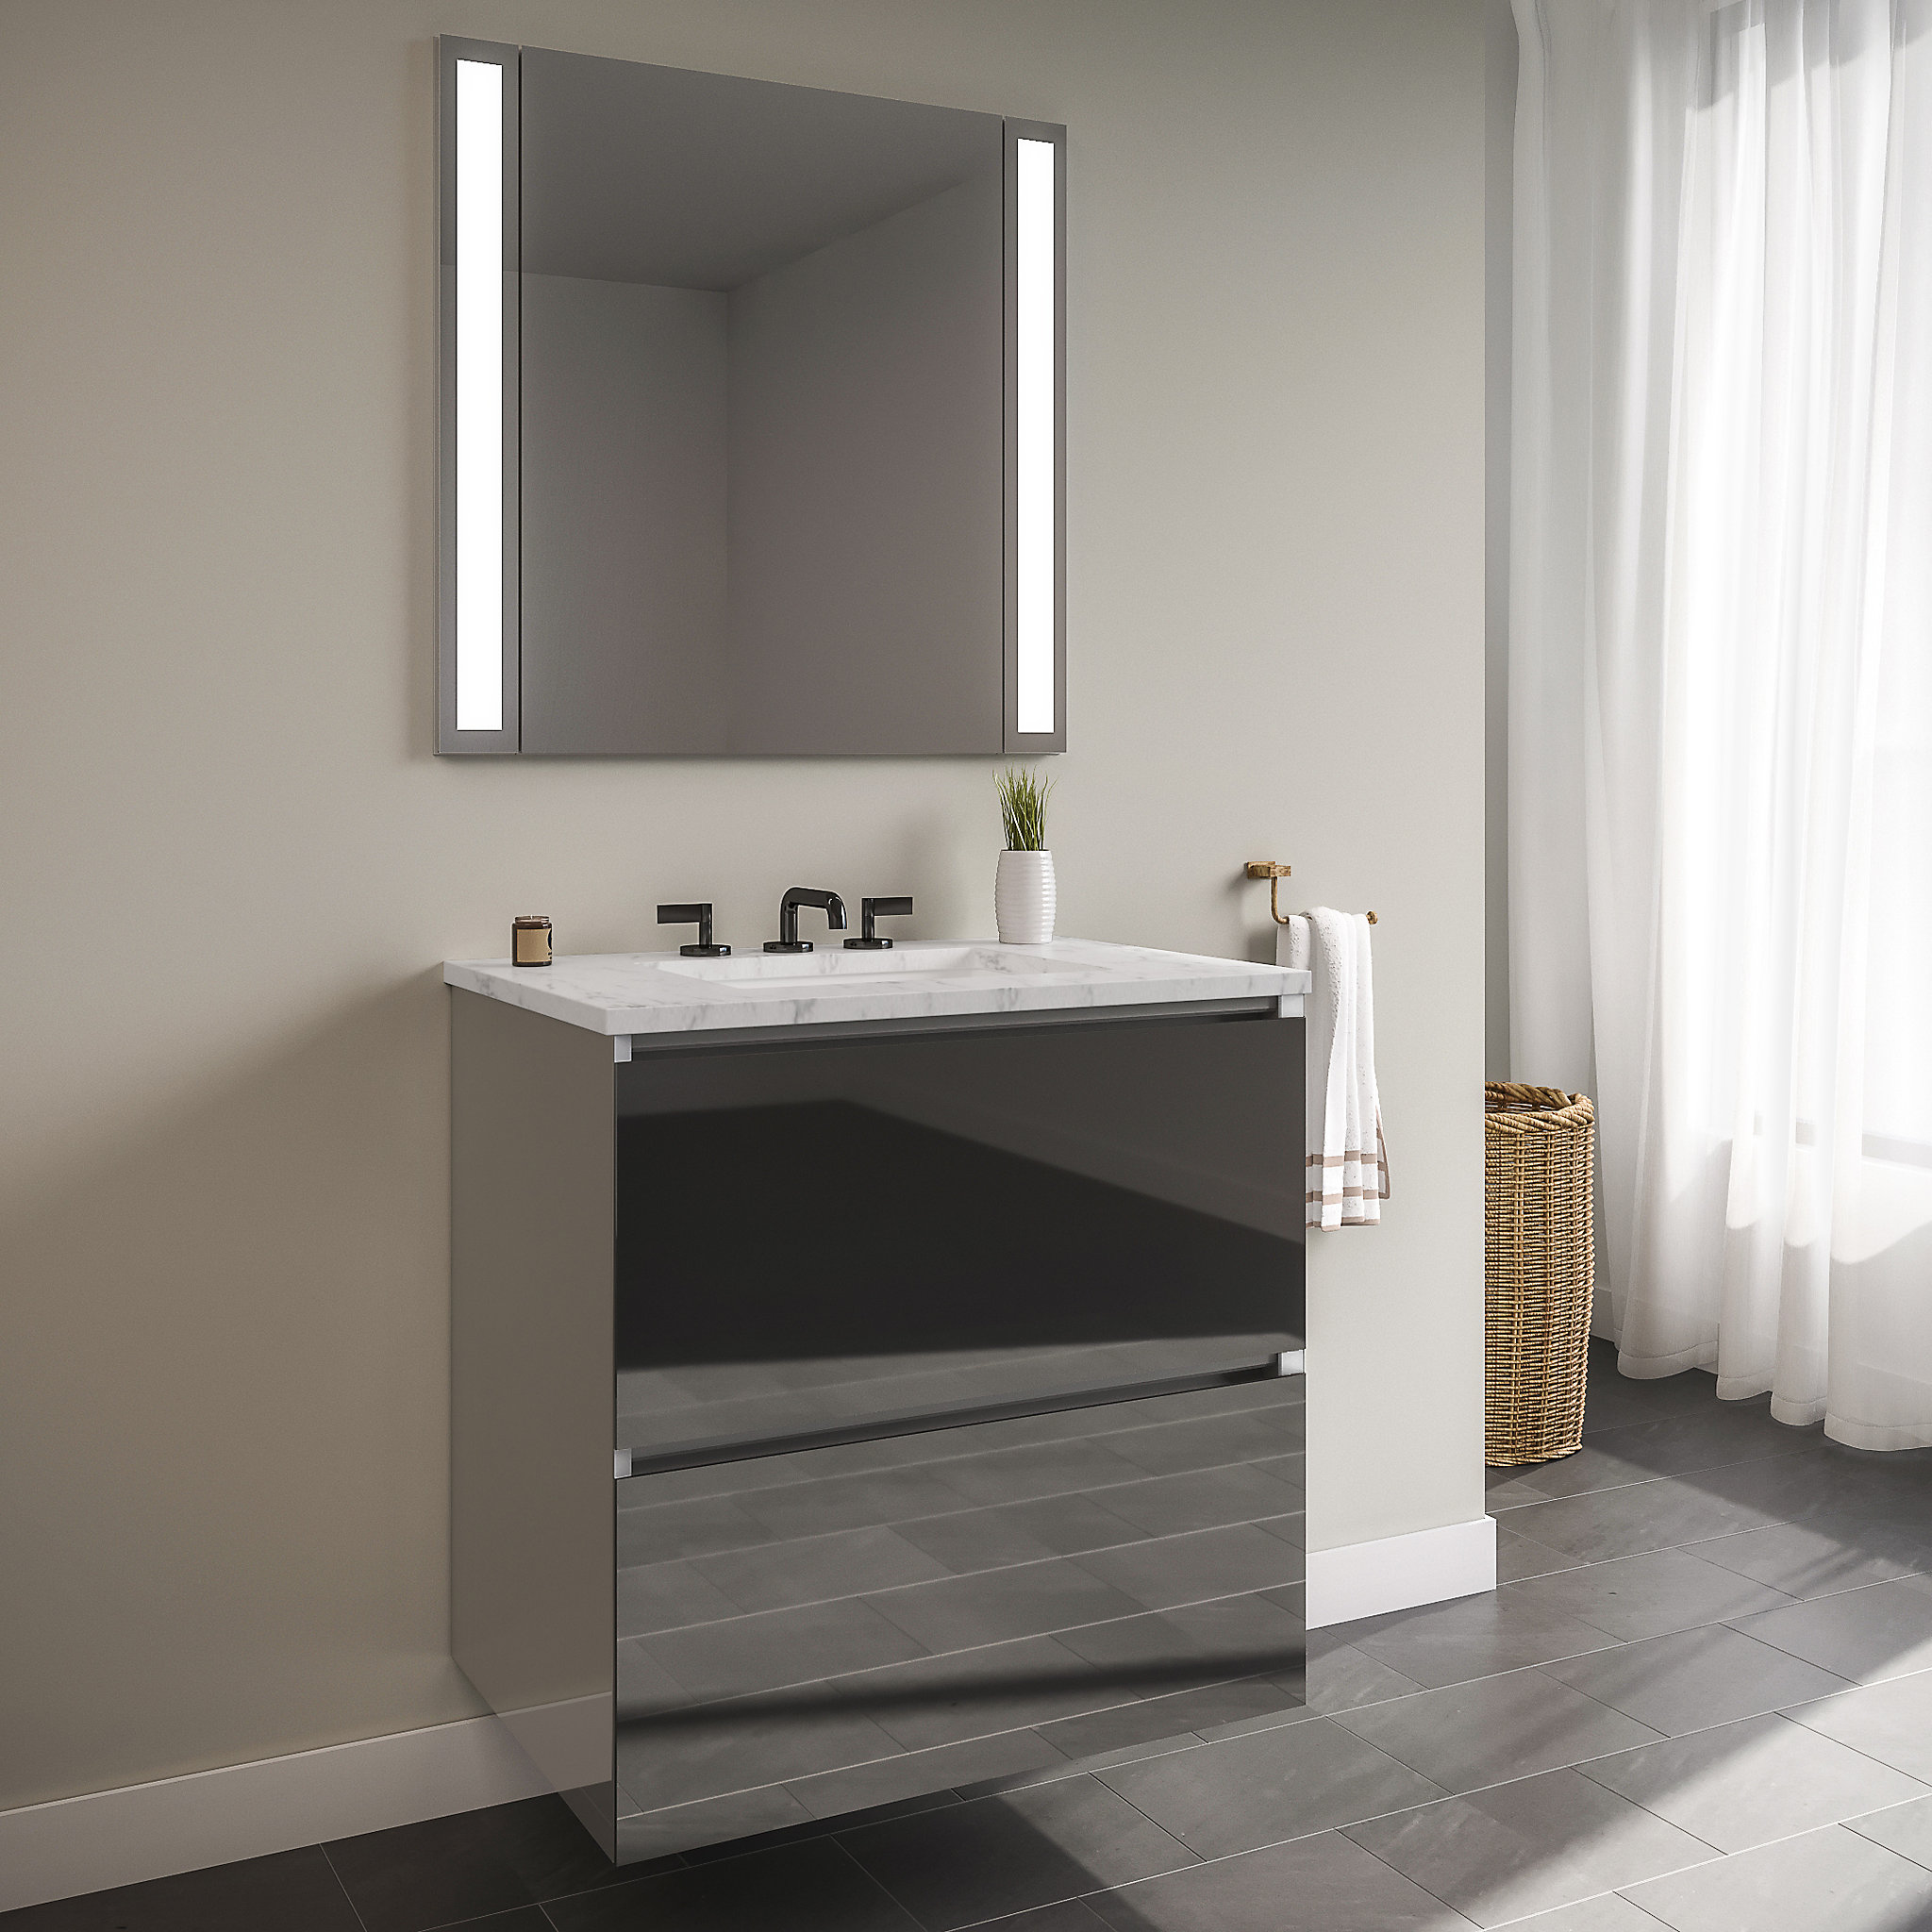 Robern 30119400NB00002 Curated Cartesian Vanity, 30" x 15" x 21", Two Drawer, Tinted Gray Mirror Glass, Plumbing Drawer, Full Dr